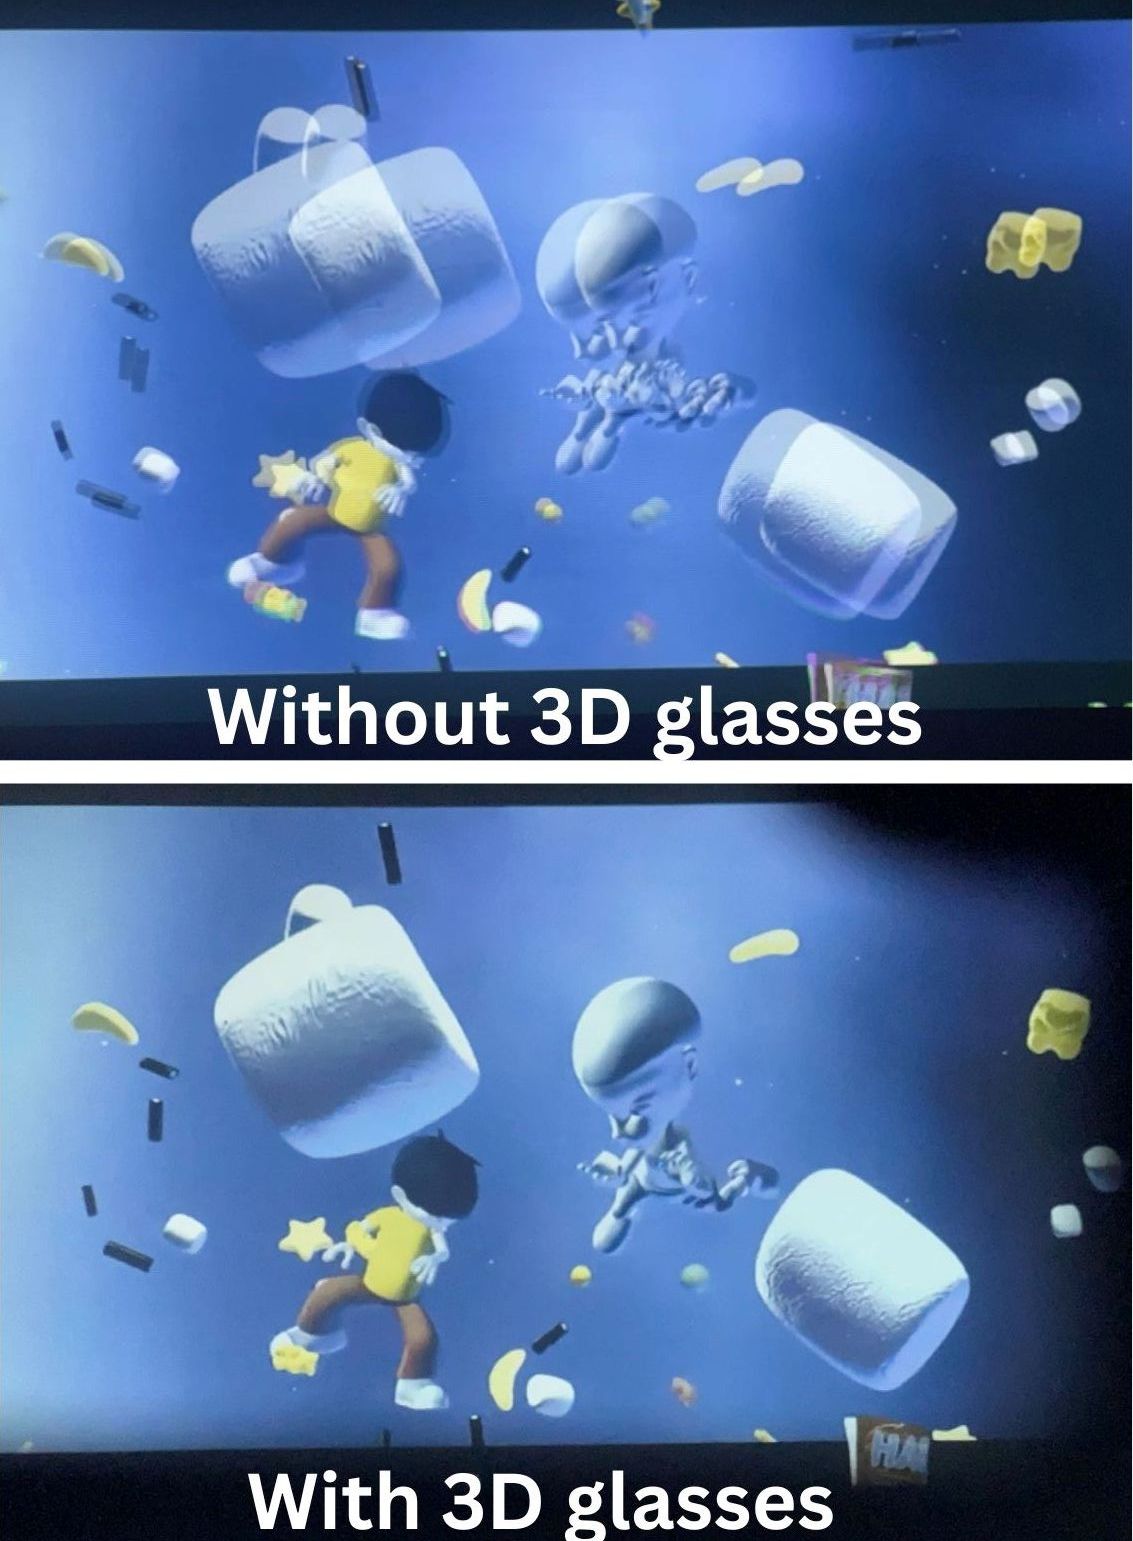 The comparison when watching 3D images with 3D glasses and without 3D glasses